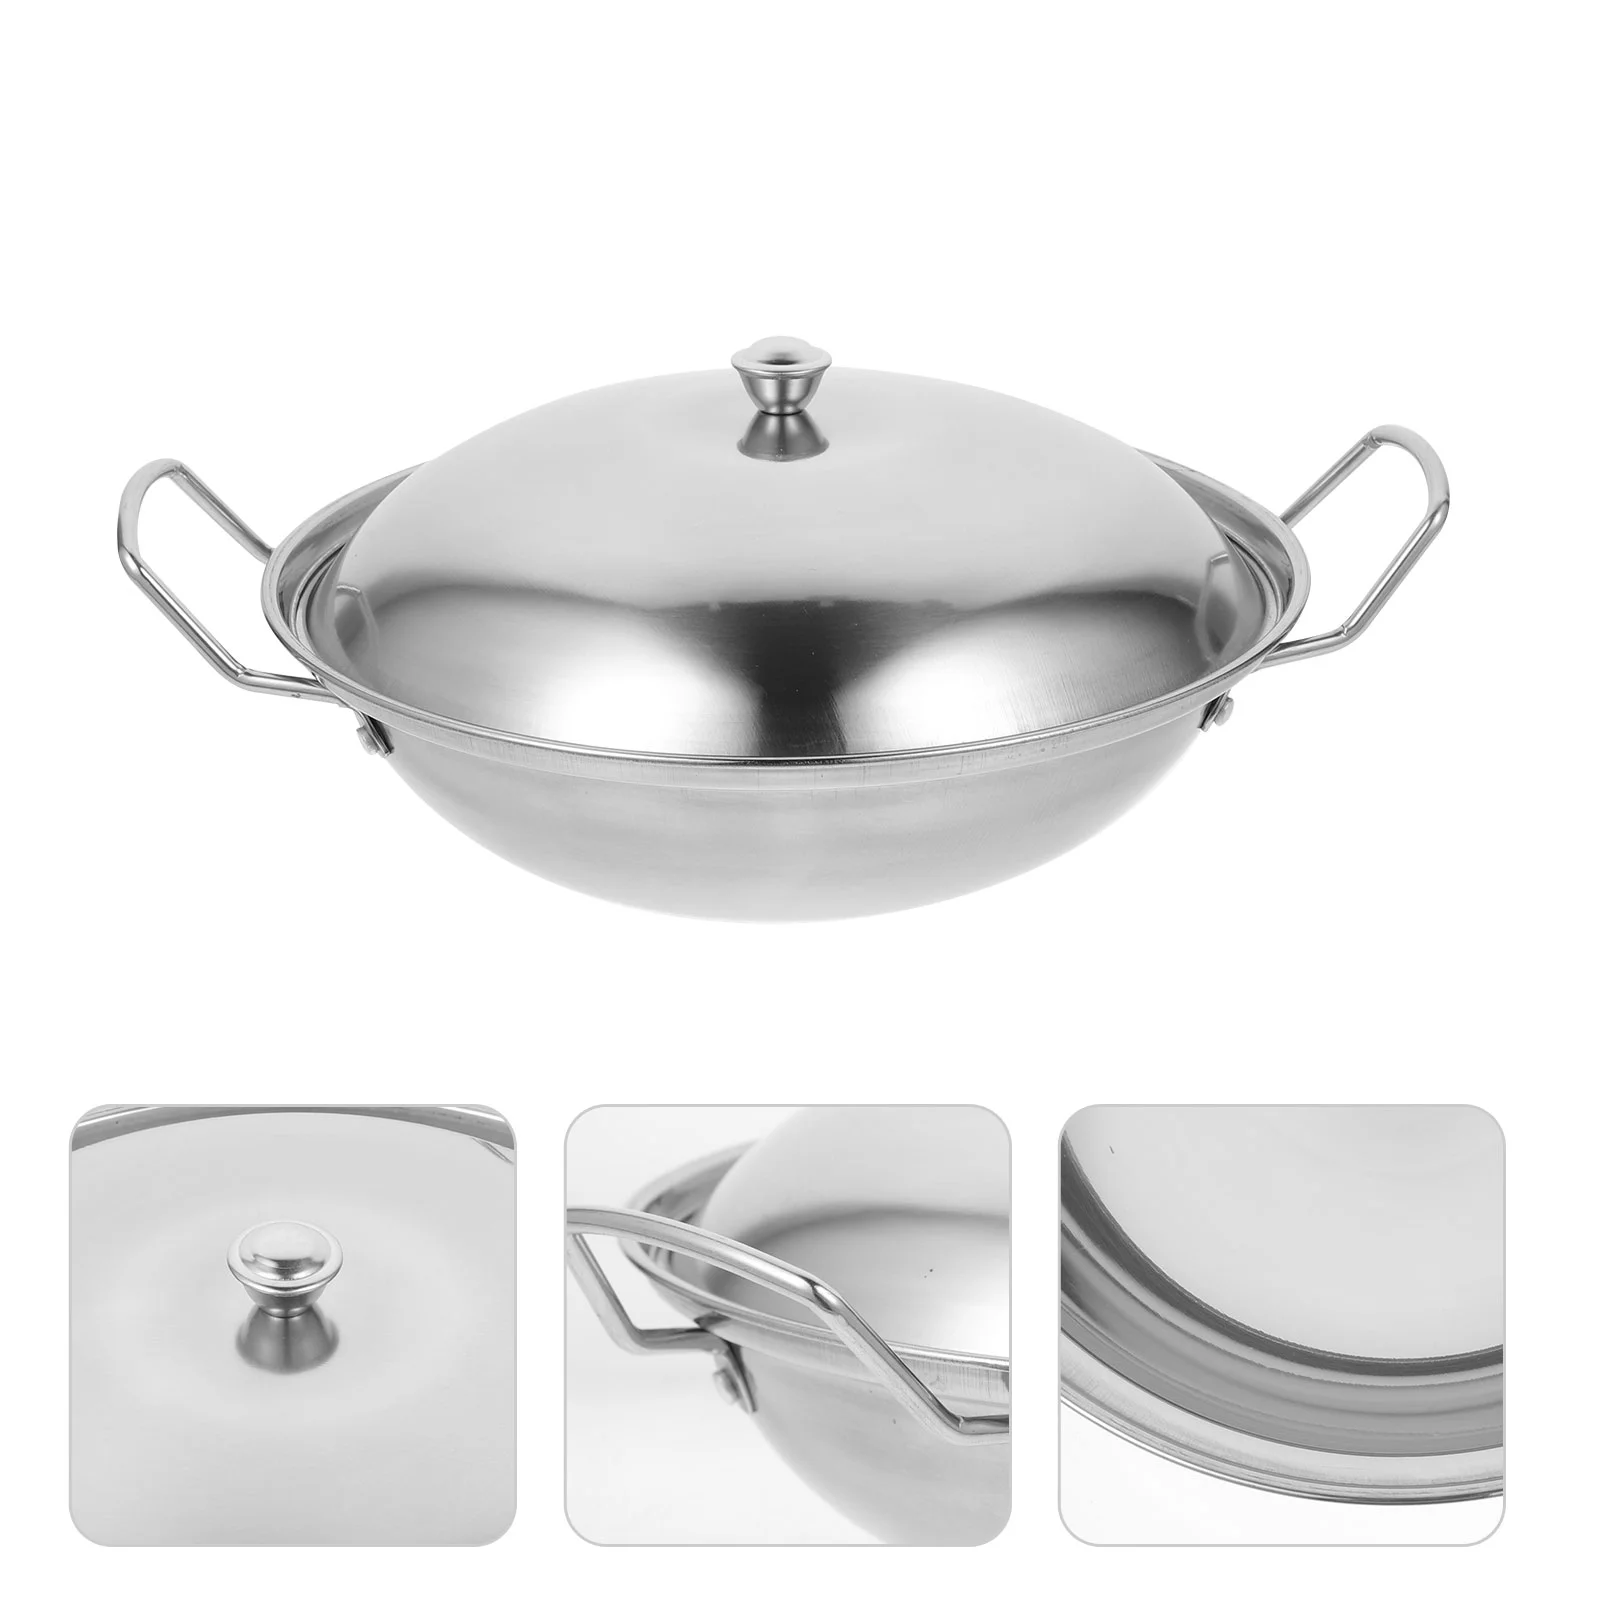 

Pan Wok Pot Steel Frying Fry Stainless Cooking Chinese Stir Skillet Lid Pans Iron Non Stick Nonstick Pow Handle Griddle Cast